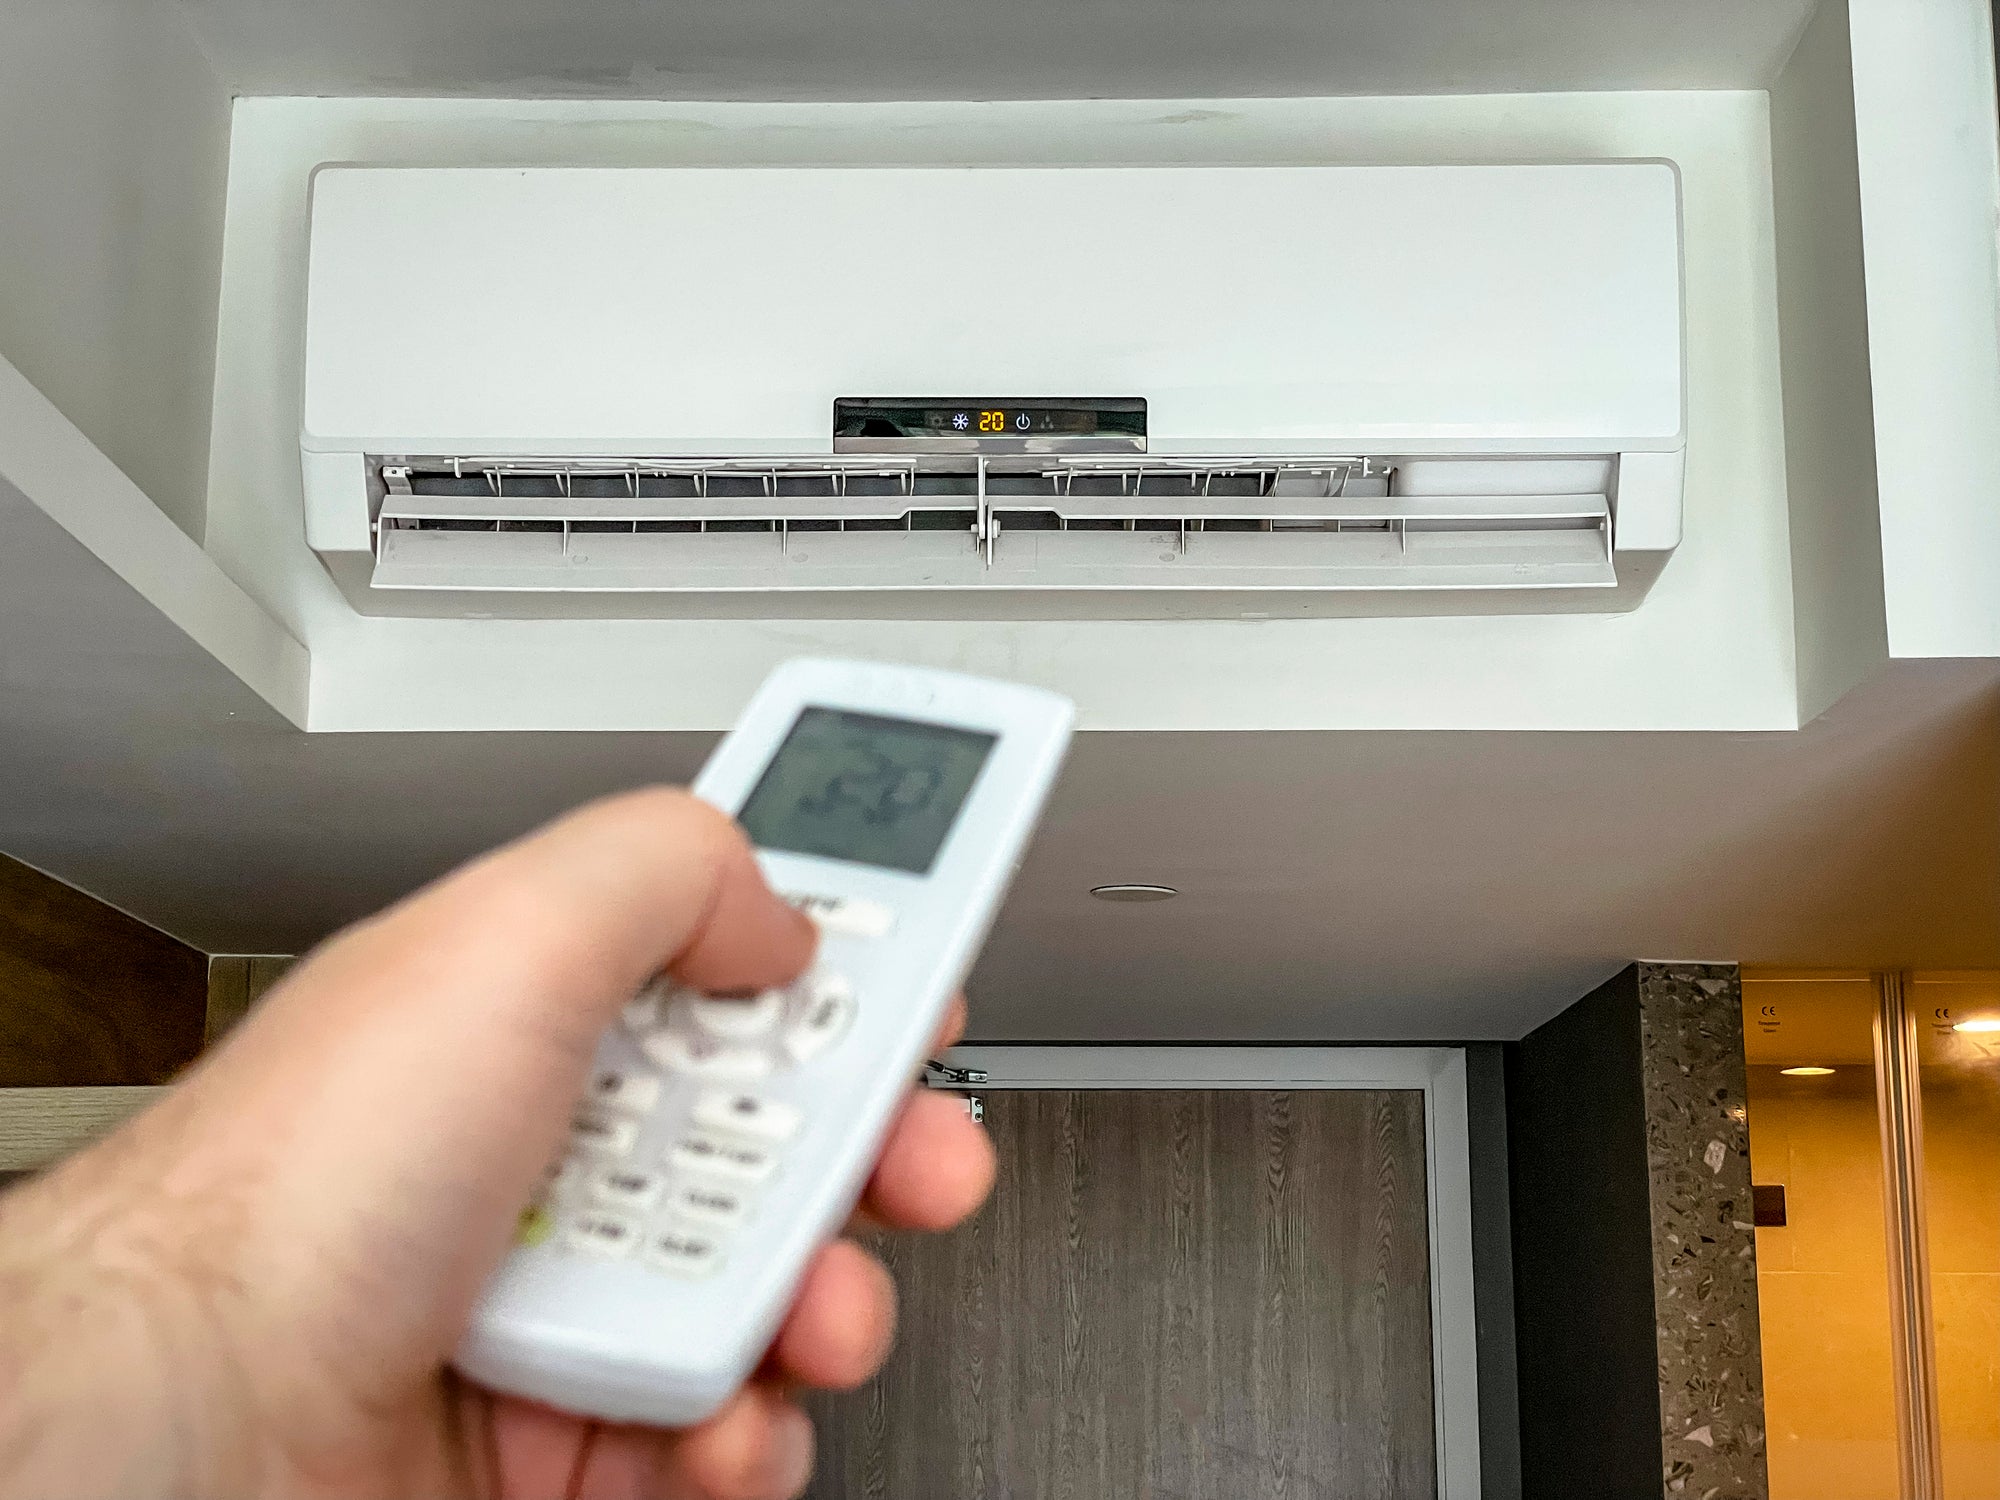 Hotel thermostat hacks to override your room temperature - The Points Guy